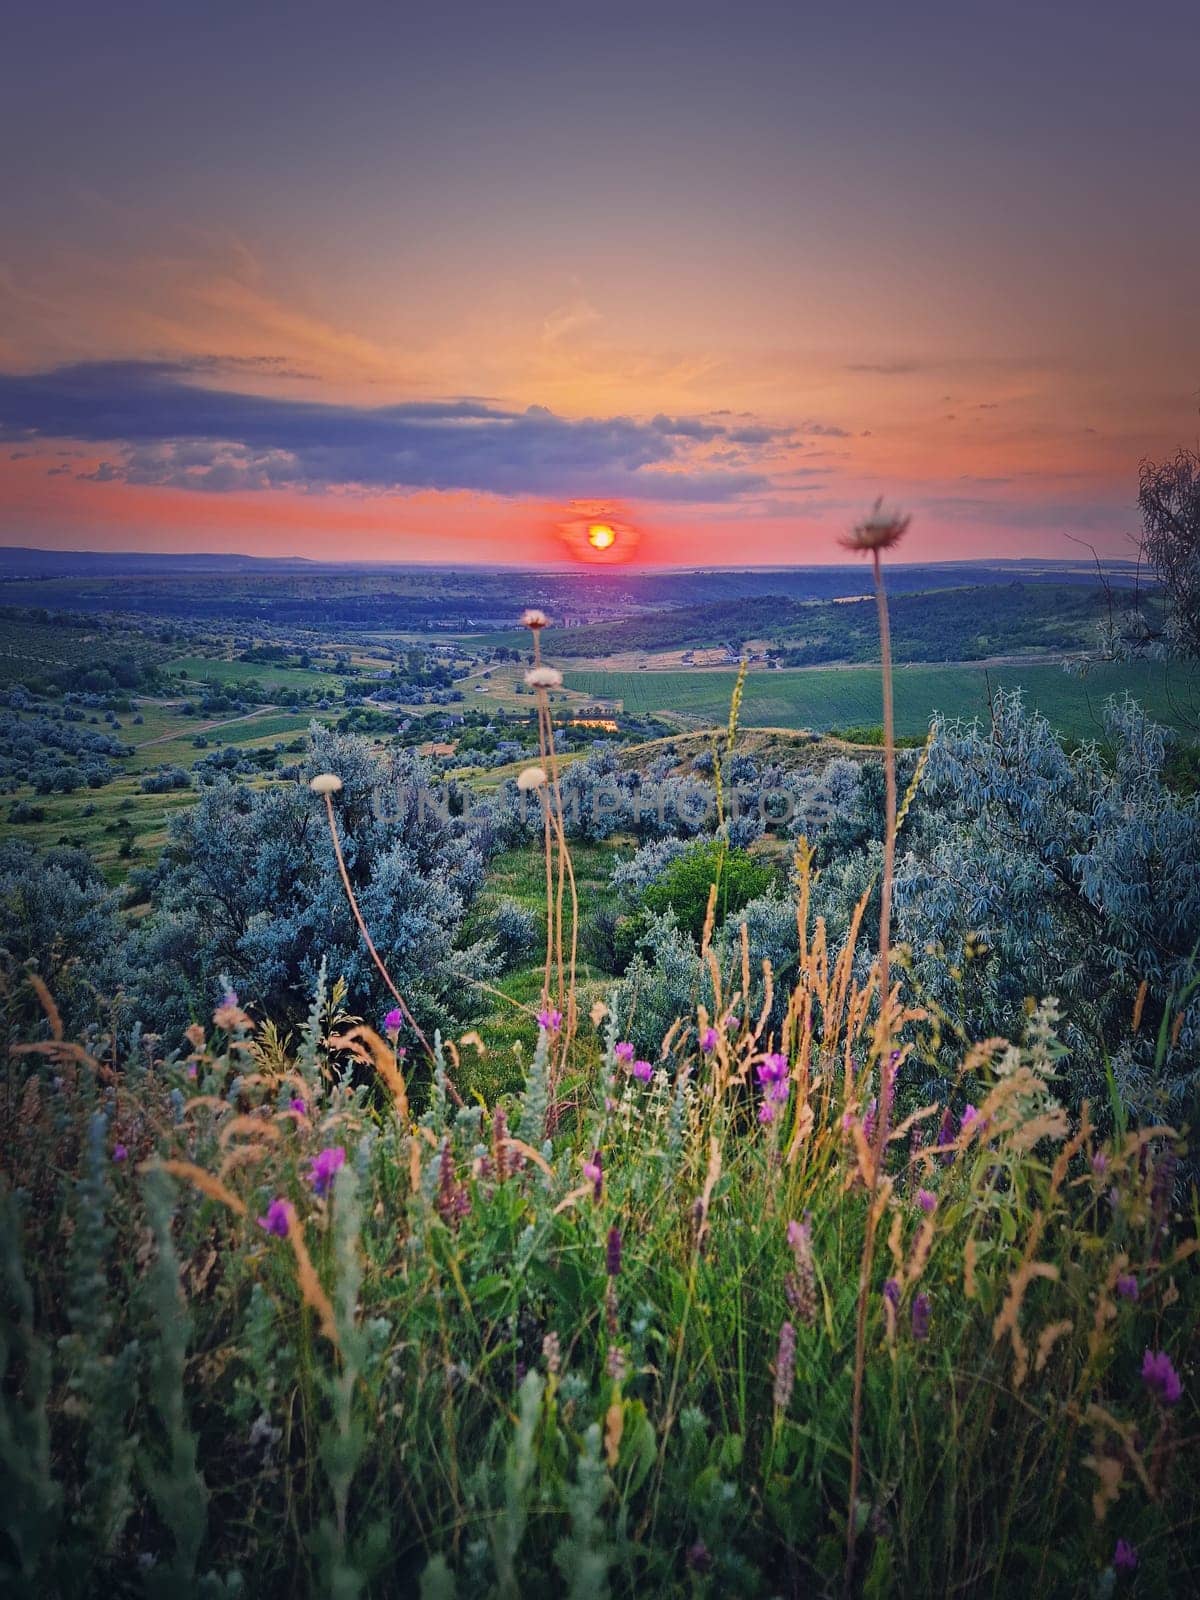 Summer sunset scene with a view over the green valley with purple flowers, vertical background